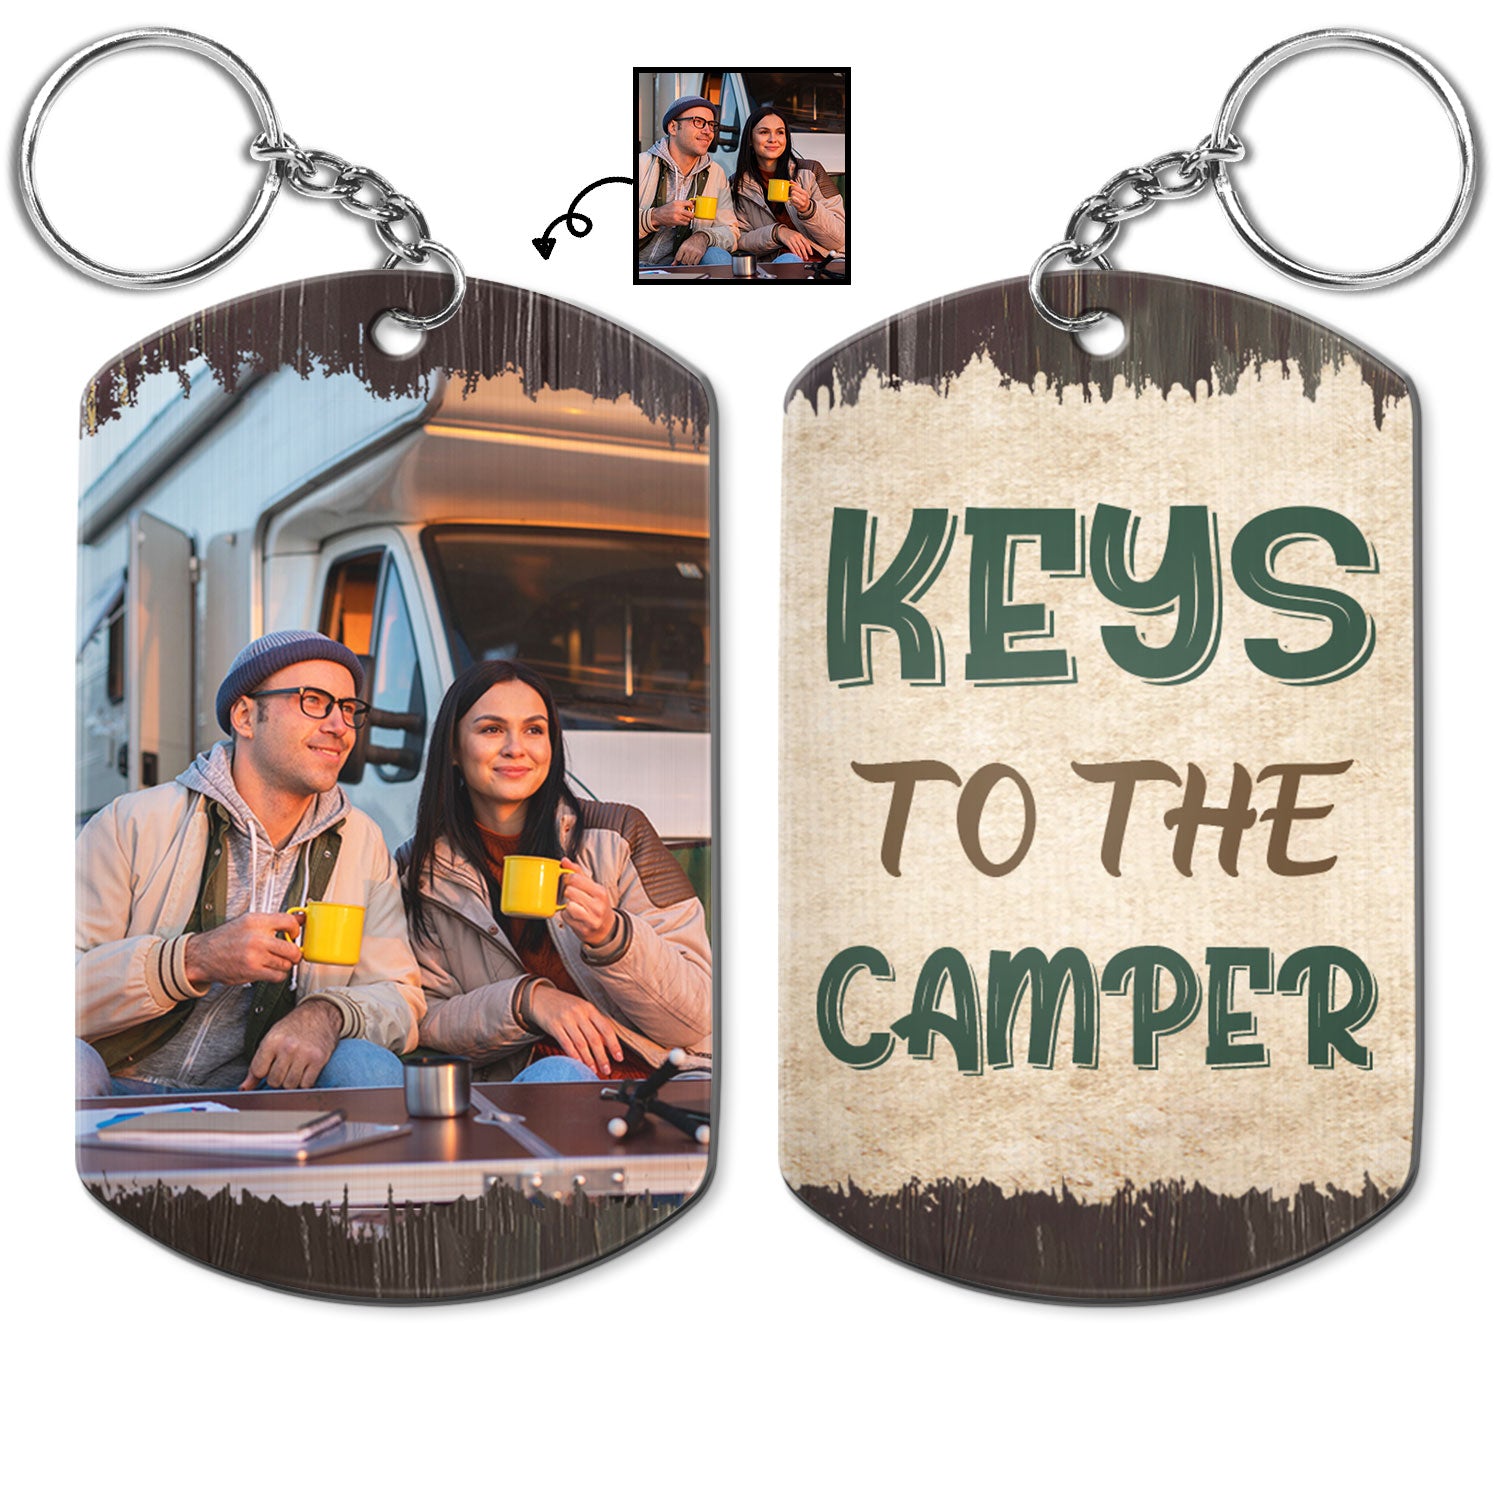 Custom Photo Keys To The Camper - Anniversary, Loving Gifts For Couples, Husband, Wife, Camping Lovers - Personalized Aluminum Keychain